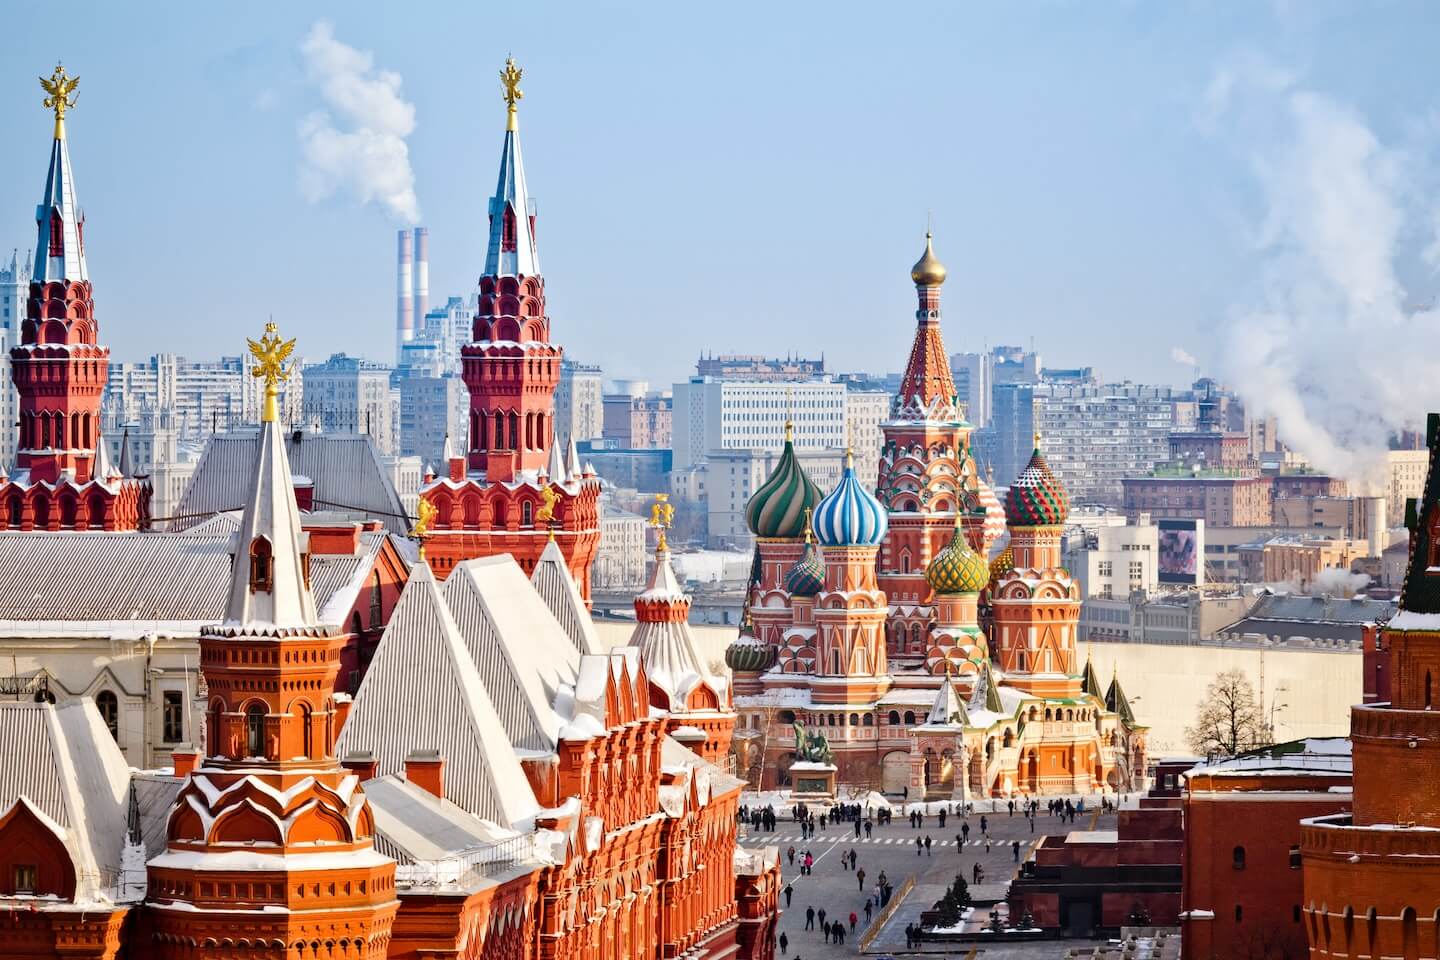 A daytime image of the Kremlin in Moscow, Russia